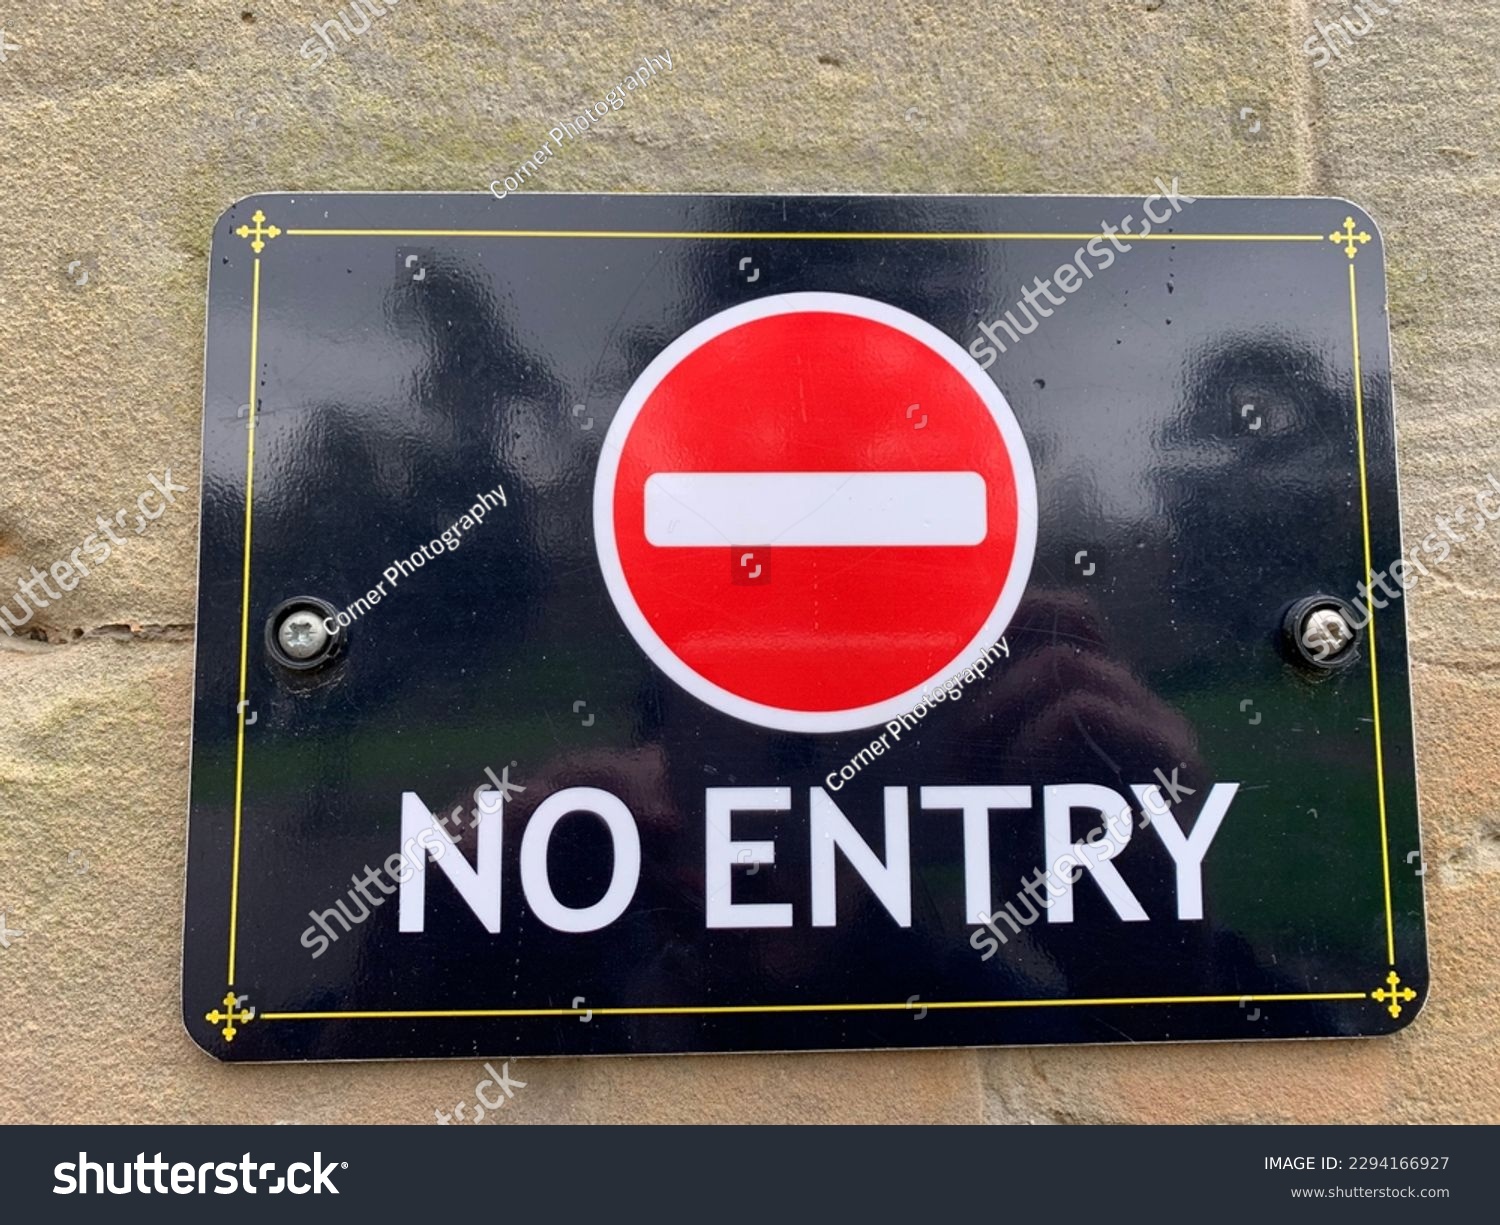 No entry sign against a black background #2294166927